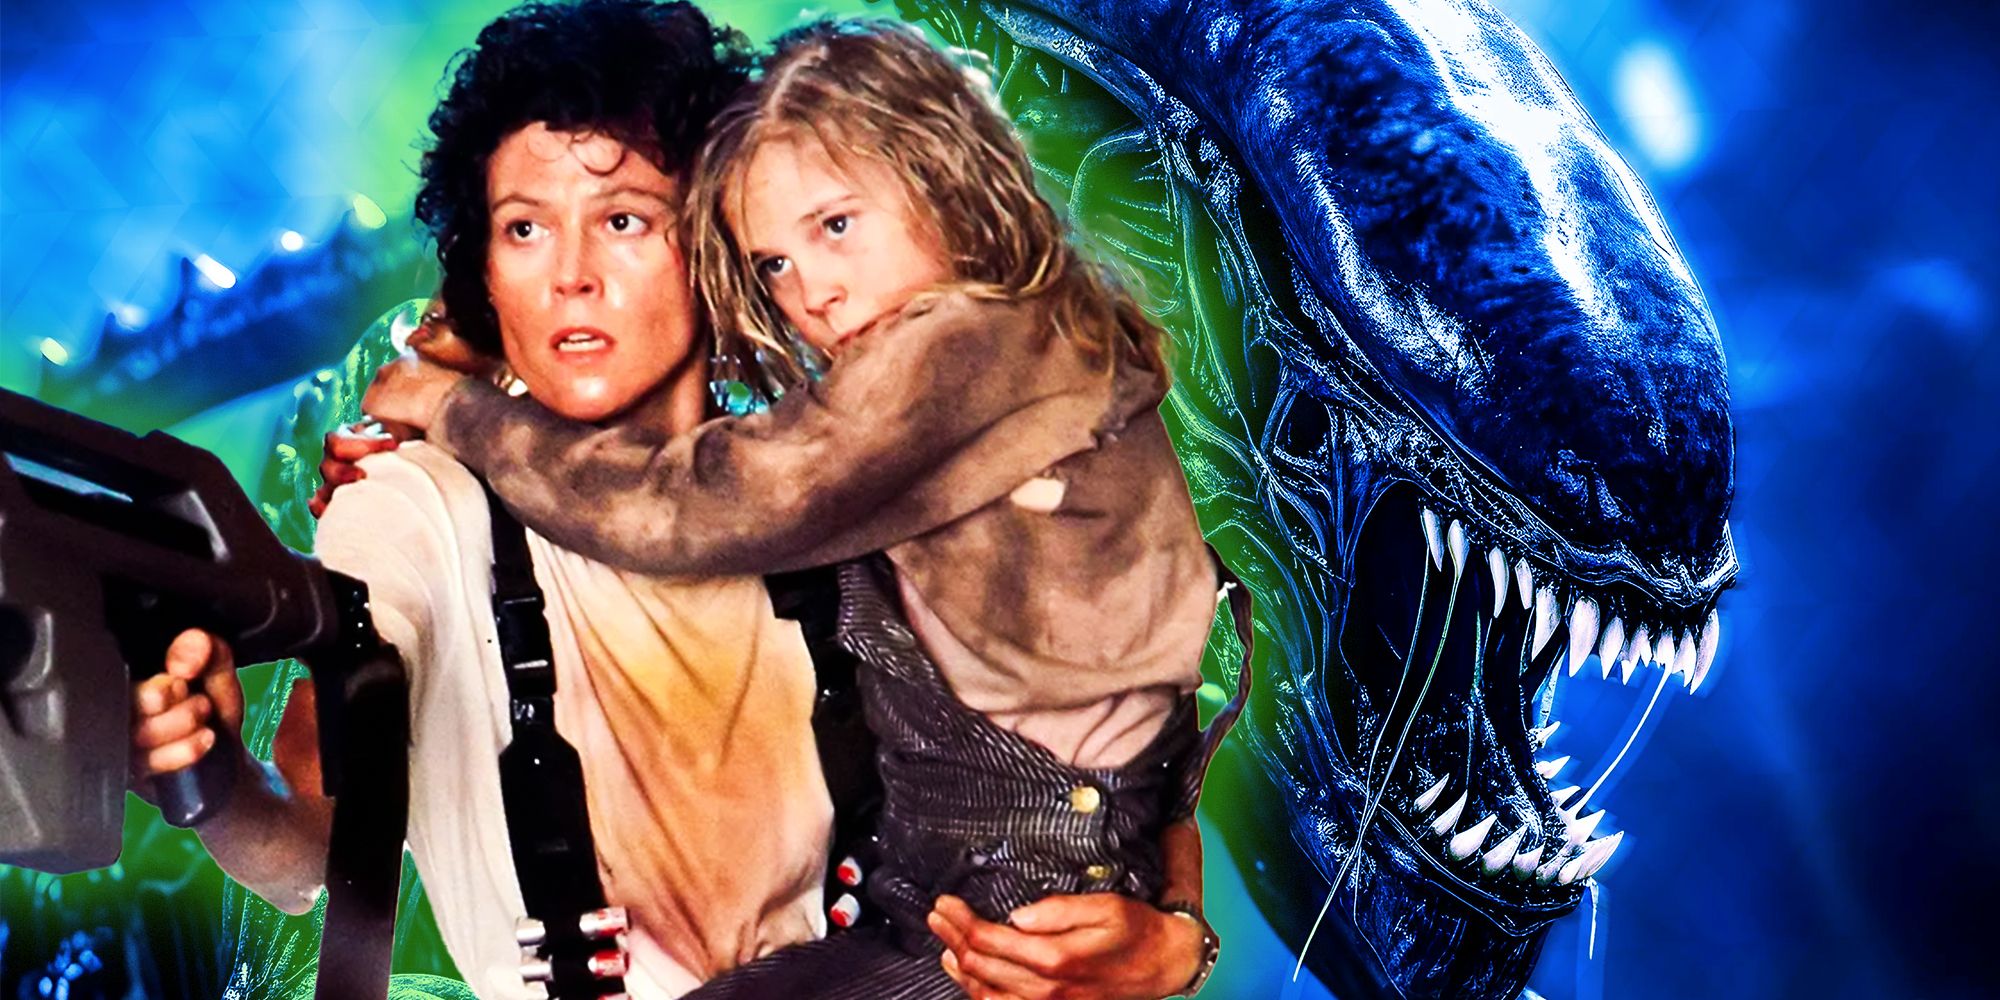 Ripley holding Newt in Aliens with a Xenomorph screeching in the background